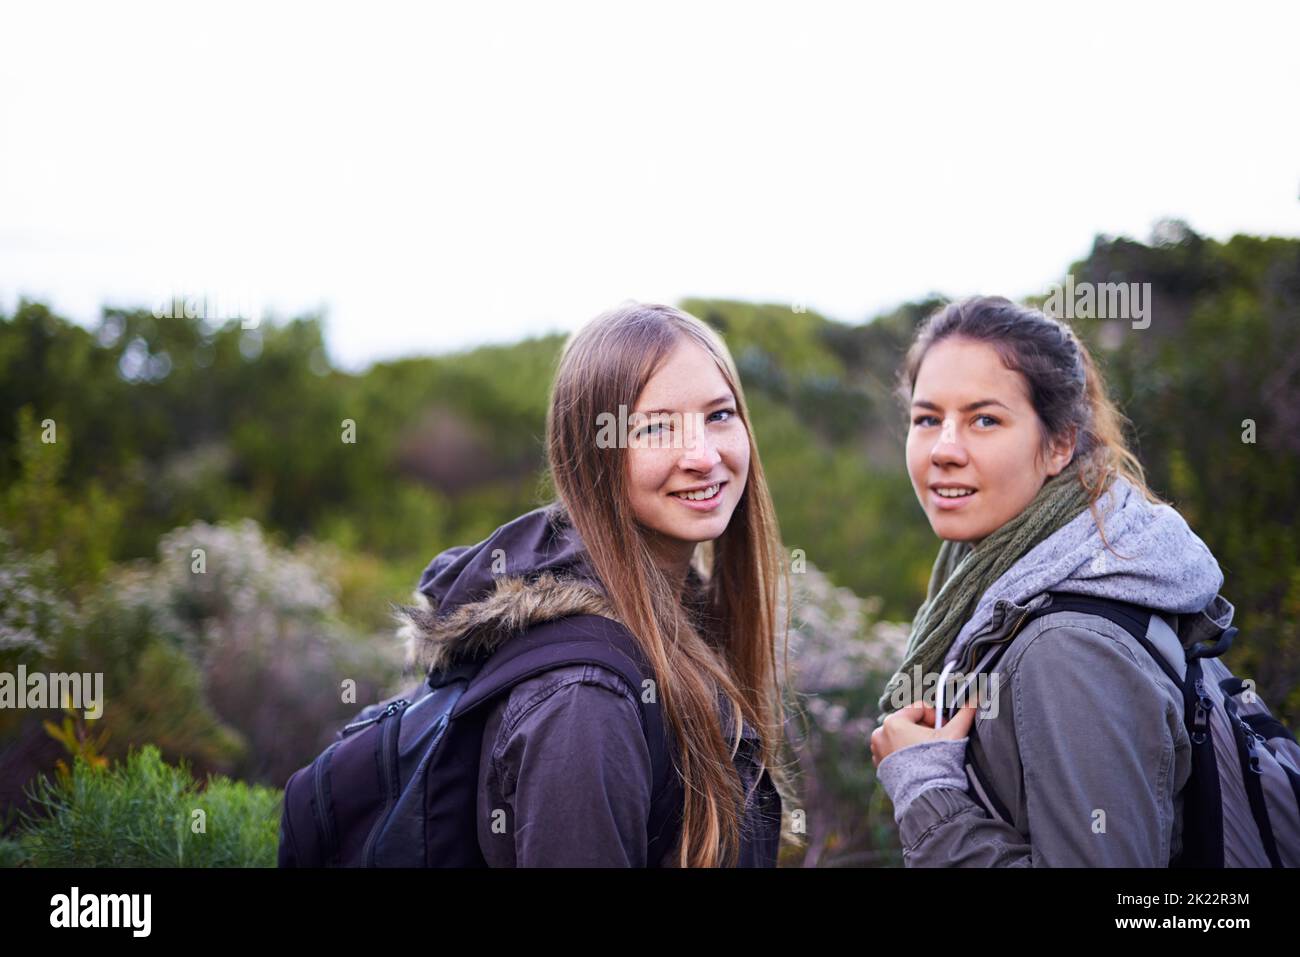 They love the outdoors. two attractive young female hikers in nature. Stock Photo